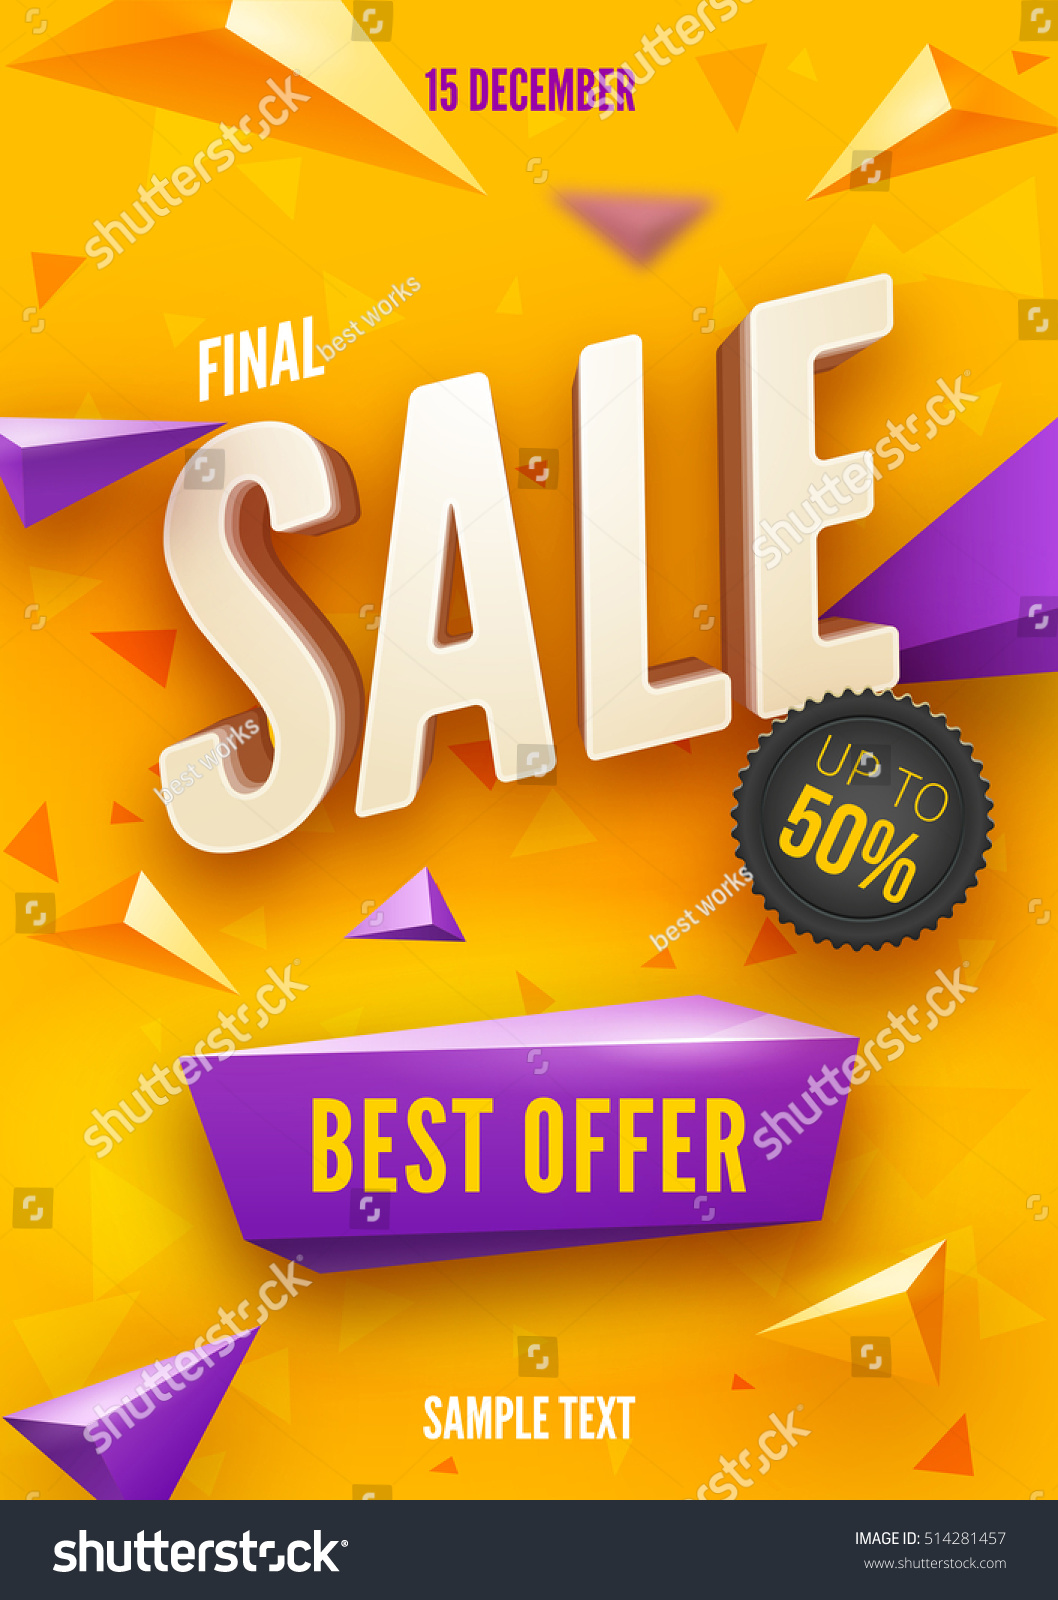 Final Sale Poster Flyer Design 3d Stock Vector Royalty Free 514281457